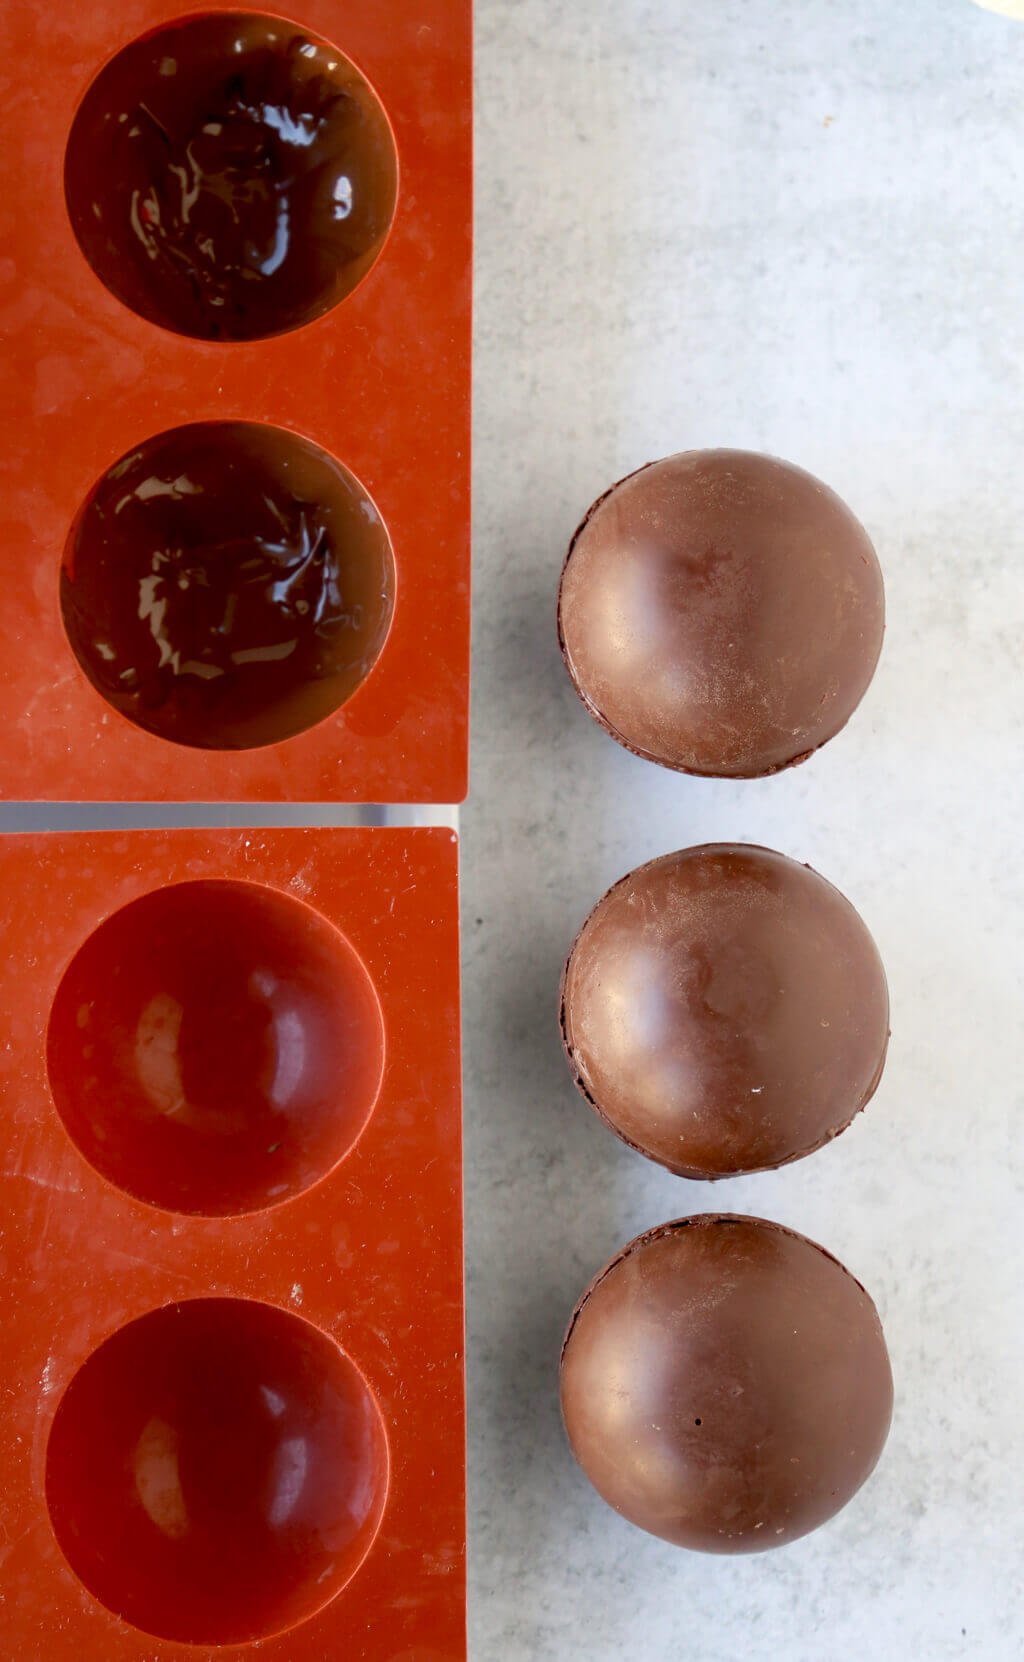 Dome molds covered in melted chocolate next to hardened chocolate domes that have just come out of the molds